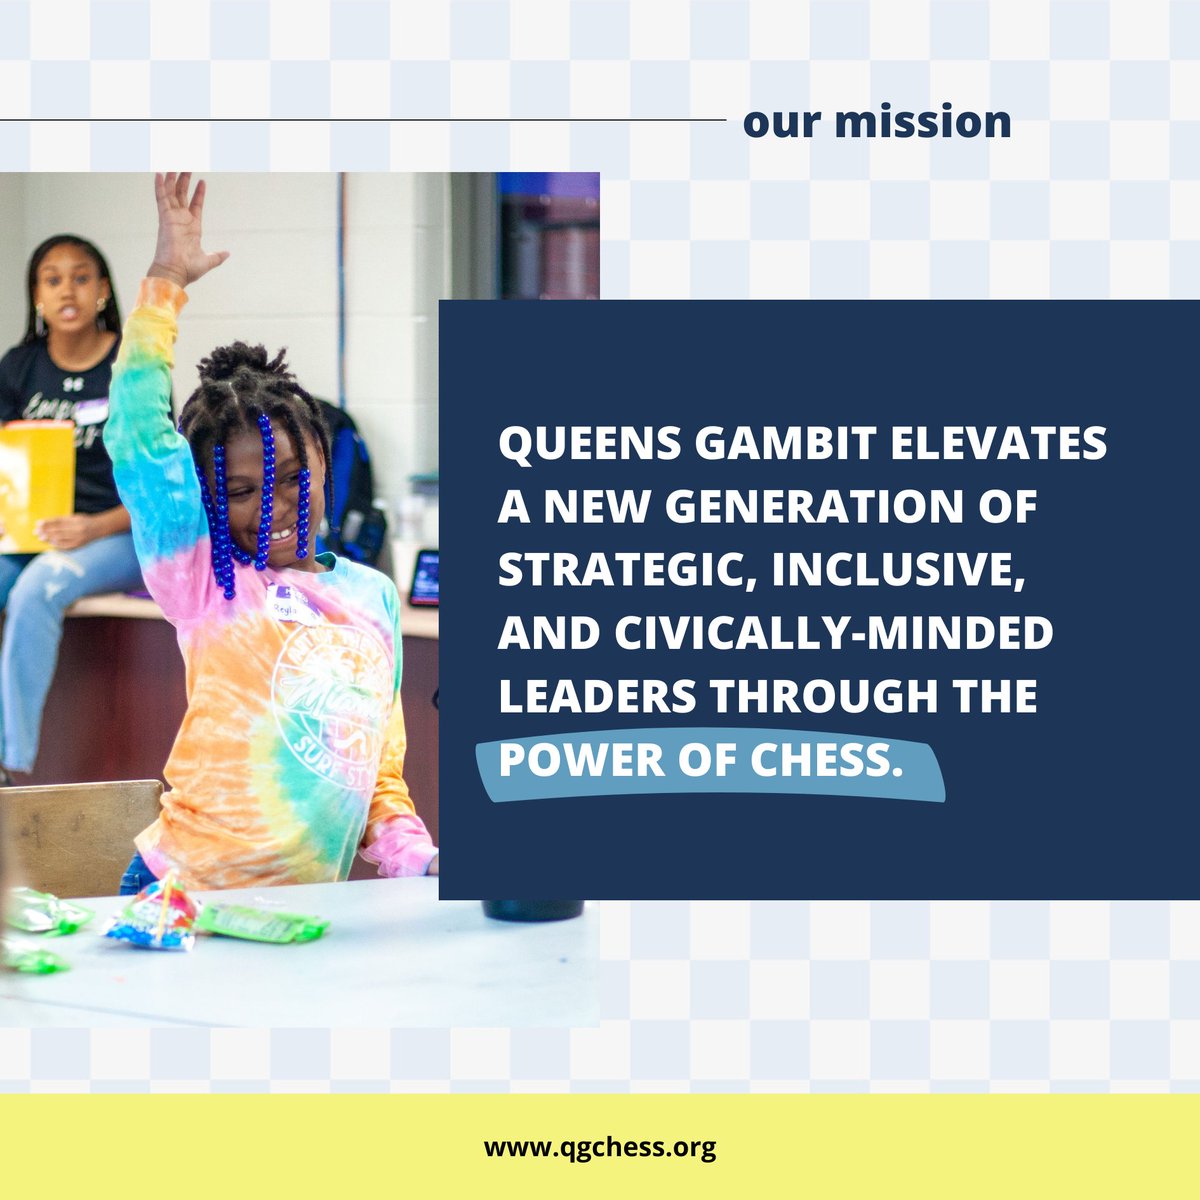 Our mission is our guiding light ♟️

#queensgambitpgh #powerofchess #strategicleadership #youthempowerment